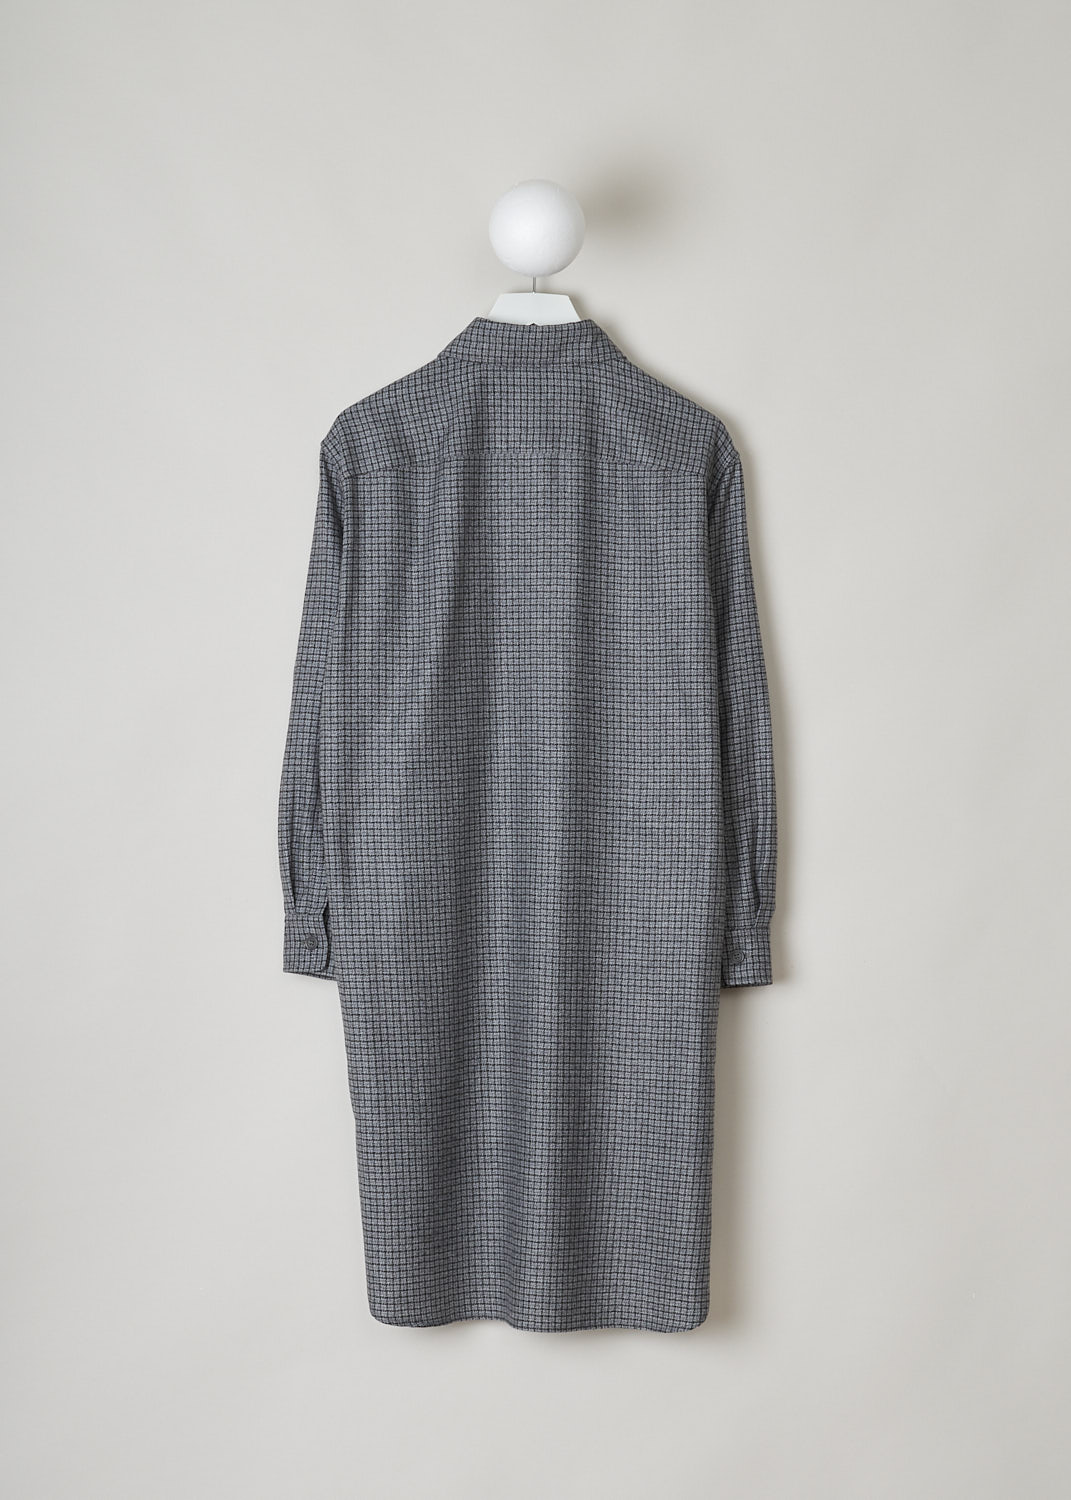 ASPESI, GREY CHECKERED SHIRT DRESS, 2986_L629_42173, Grey, Print, Back, This grey checkered shirt dress has a classic collar and a button placket in the front. The long sleeves have buttoned cuffs. The dress has two breast pockets and two concealed slanted pockets. The dress has an asymmetrical finish, meaning the back is longer than the front. The dress has a curved hemline. 
